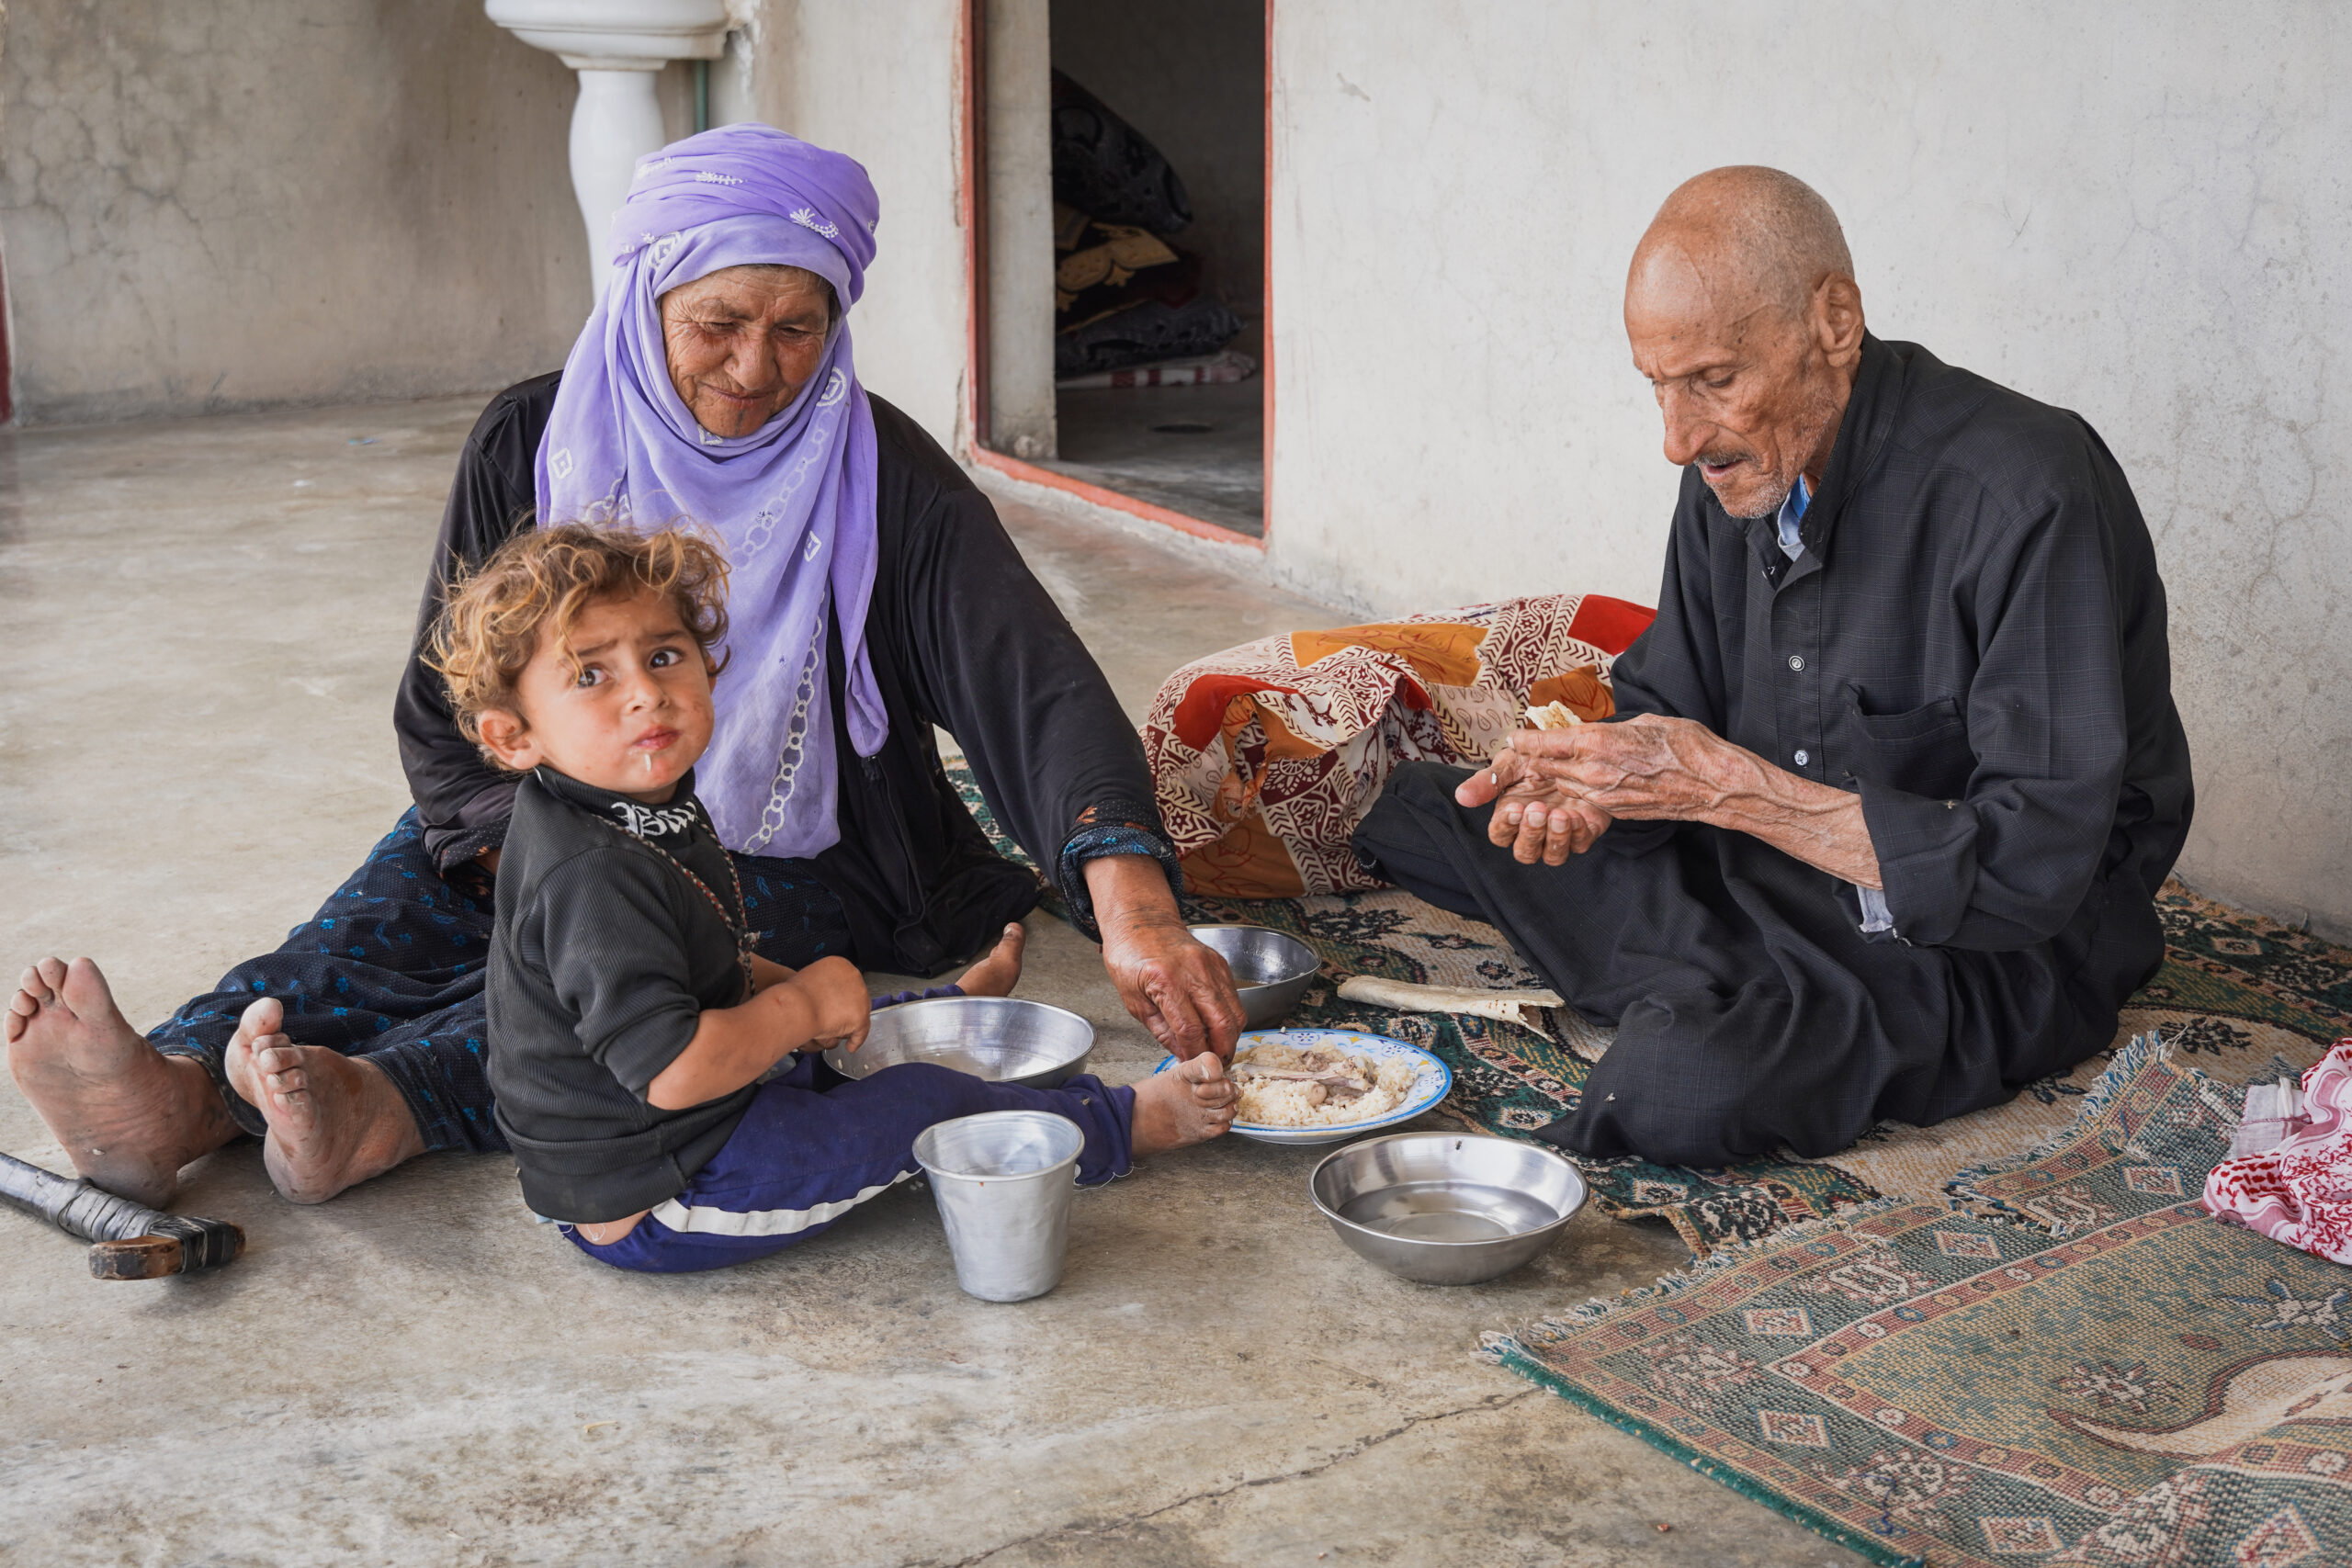 an older woman, older man, and young child sit on the ground eating a meal together